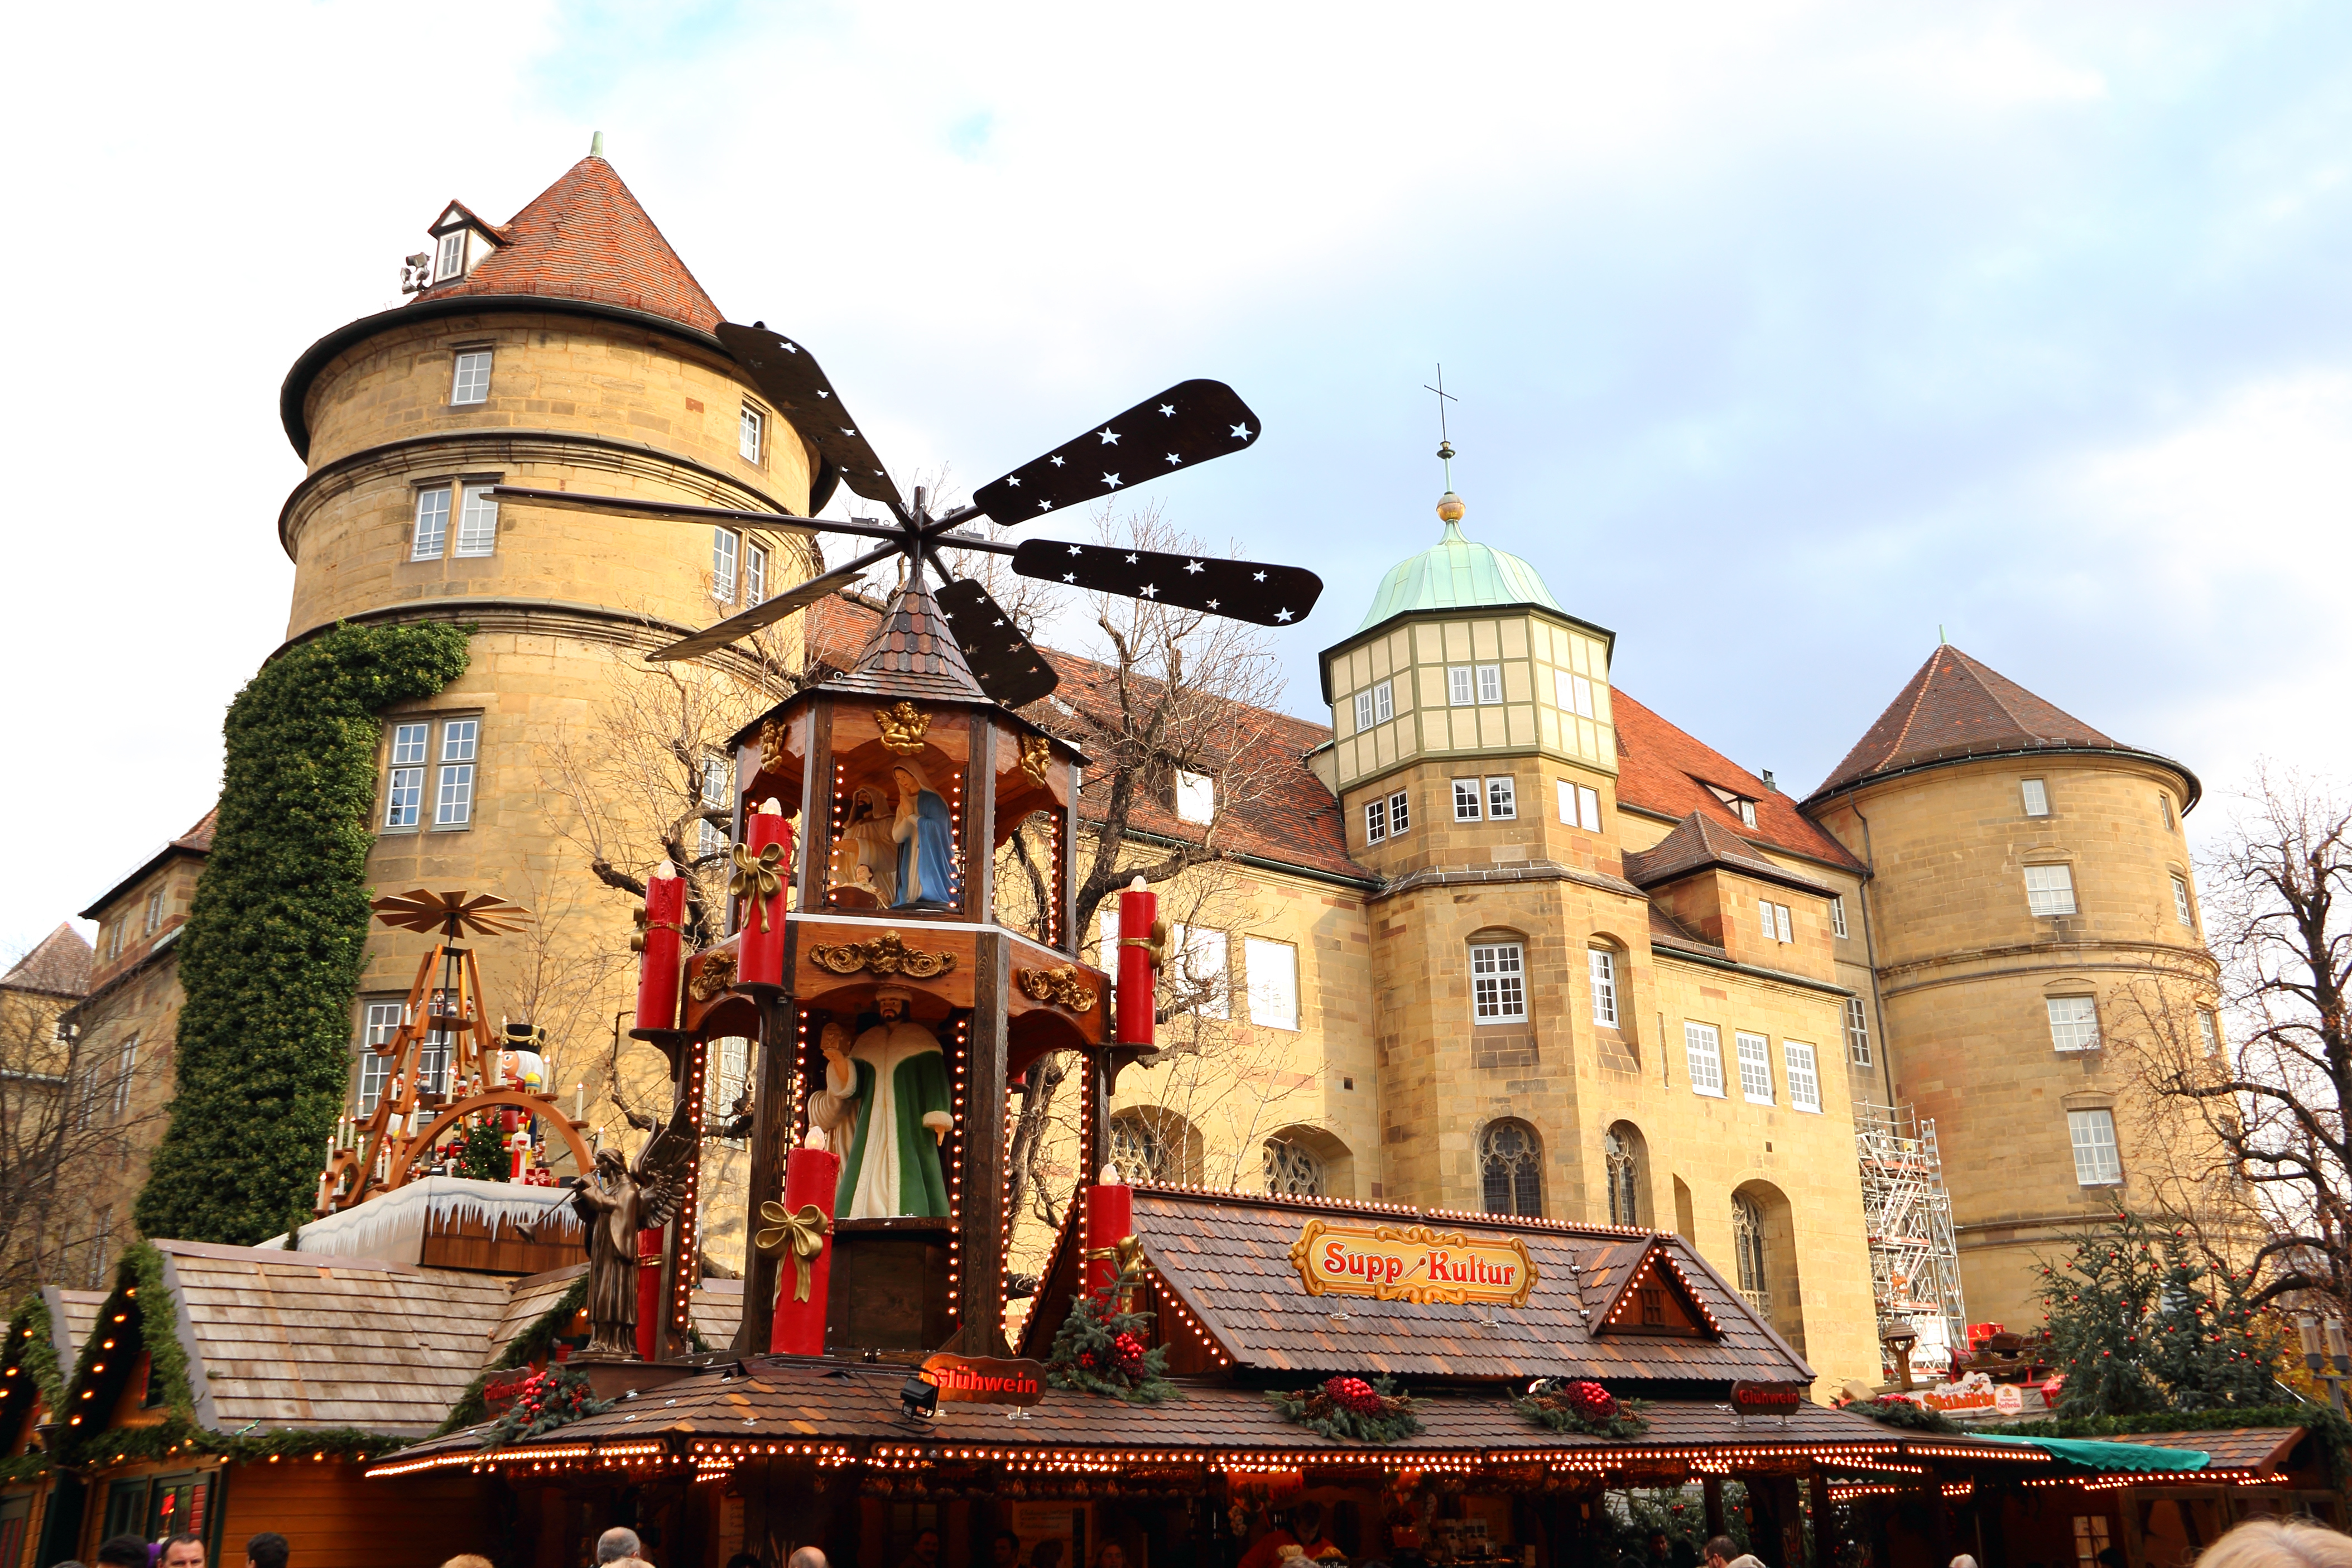 "Stuttgart, Germany - December 2, 2011: Christmas market in Stuttgart. In the foreground, a large illuminated Christmas pyramid with serving hot drinks and delicious soups. In the background is the Old Palace / National Museum (Altes Schloss/Landesmuseum)."